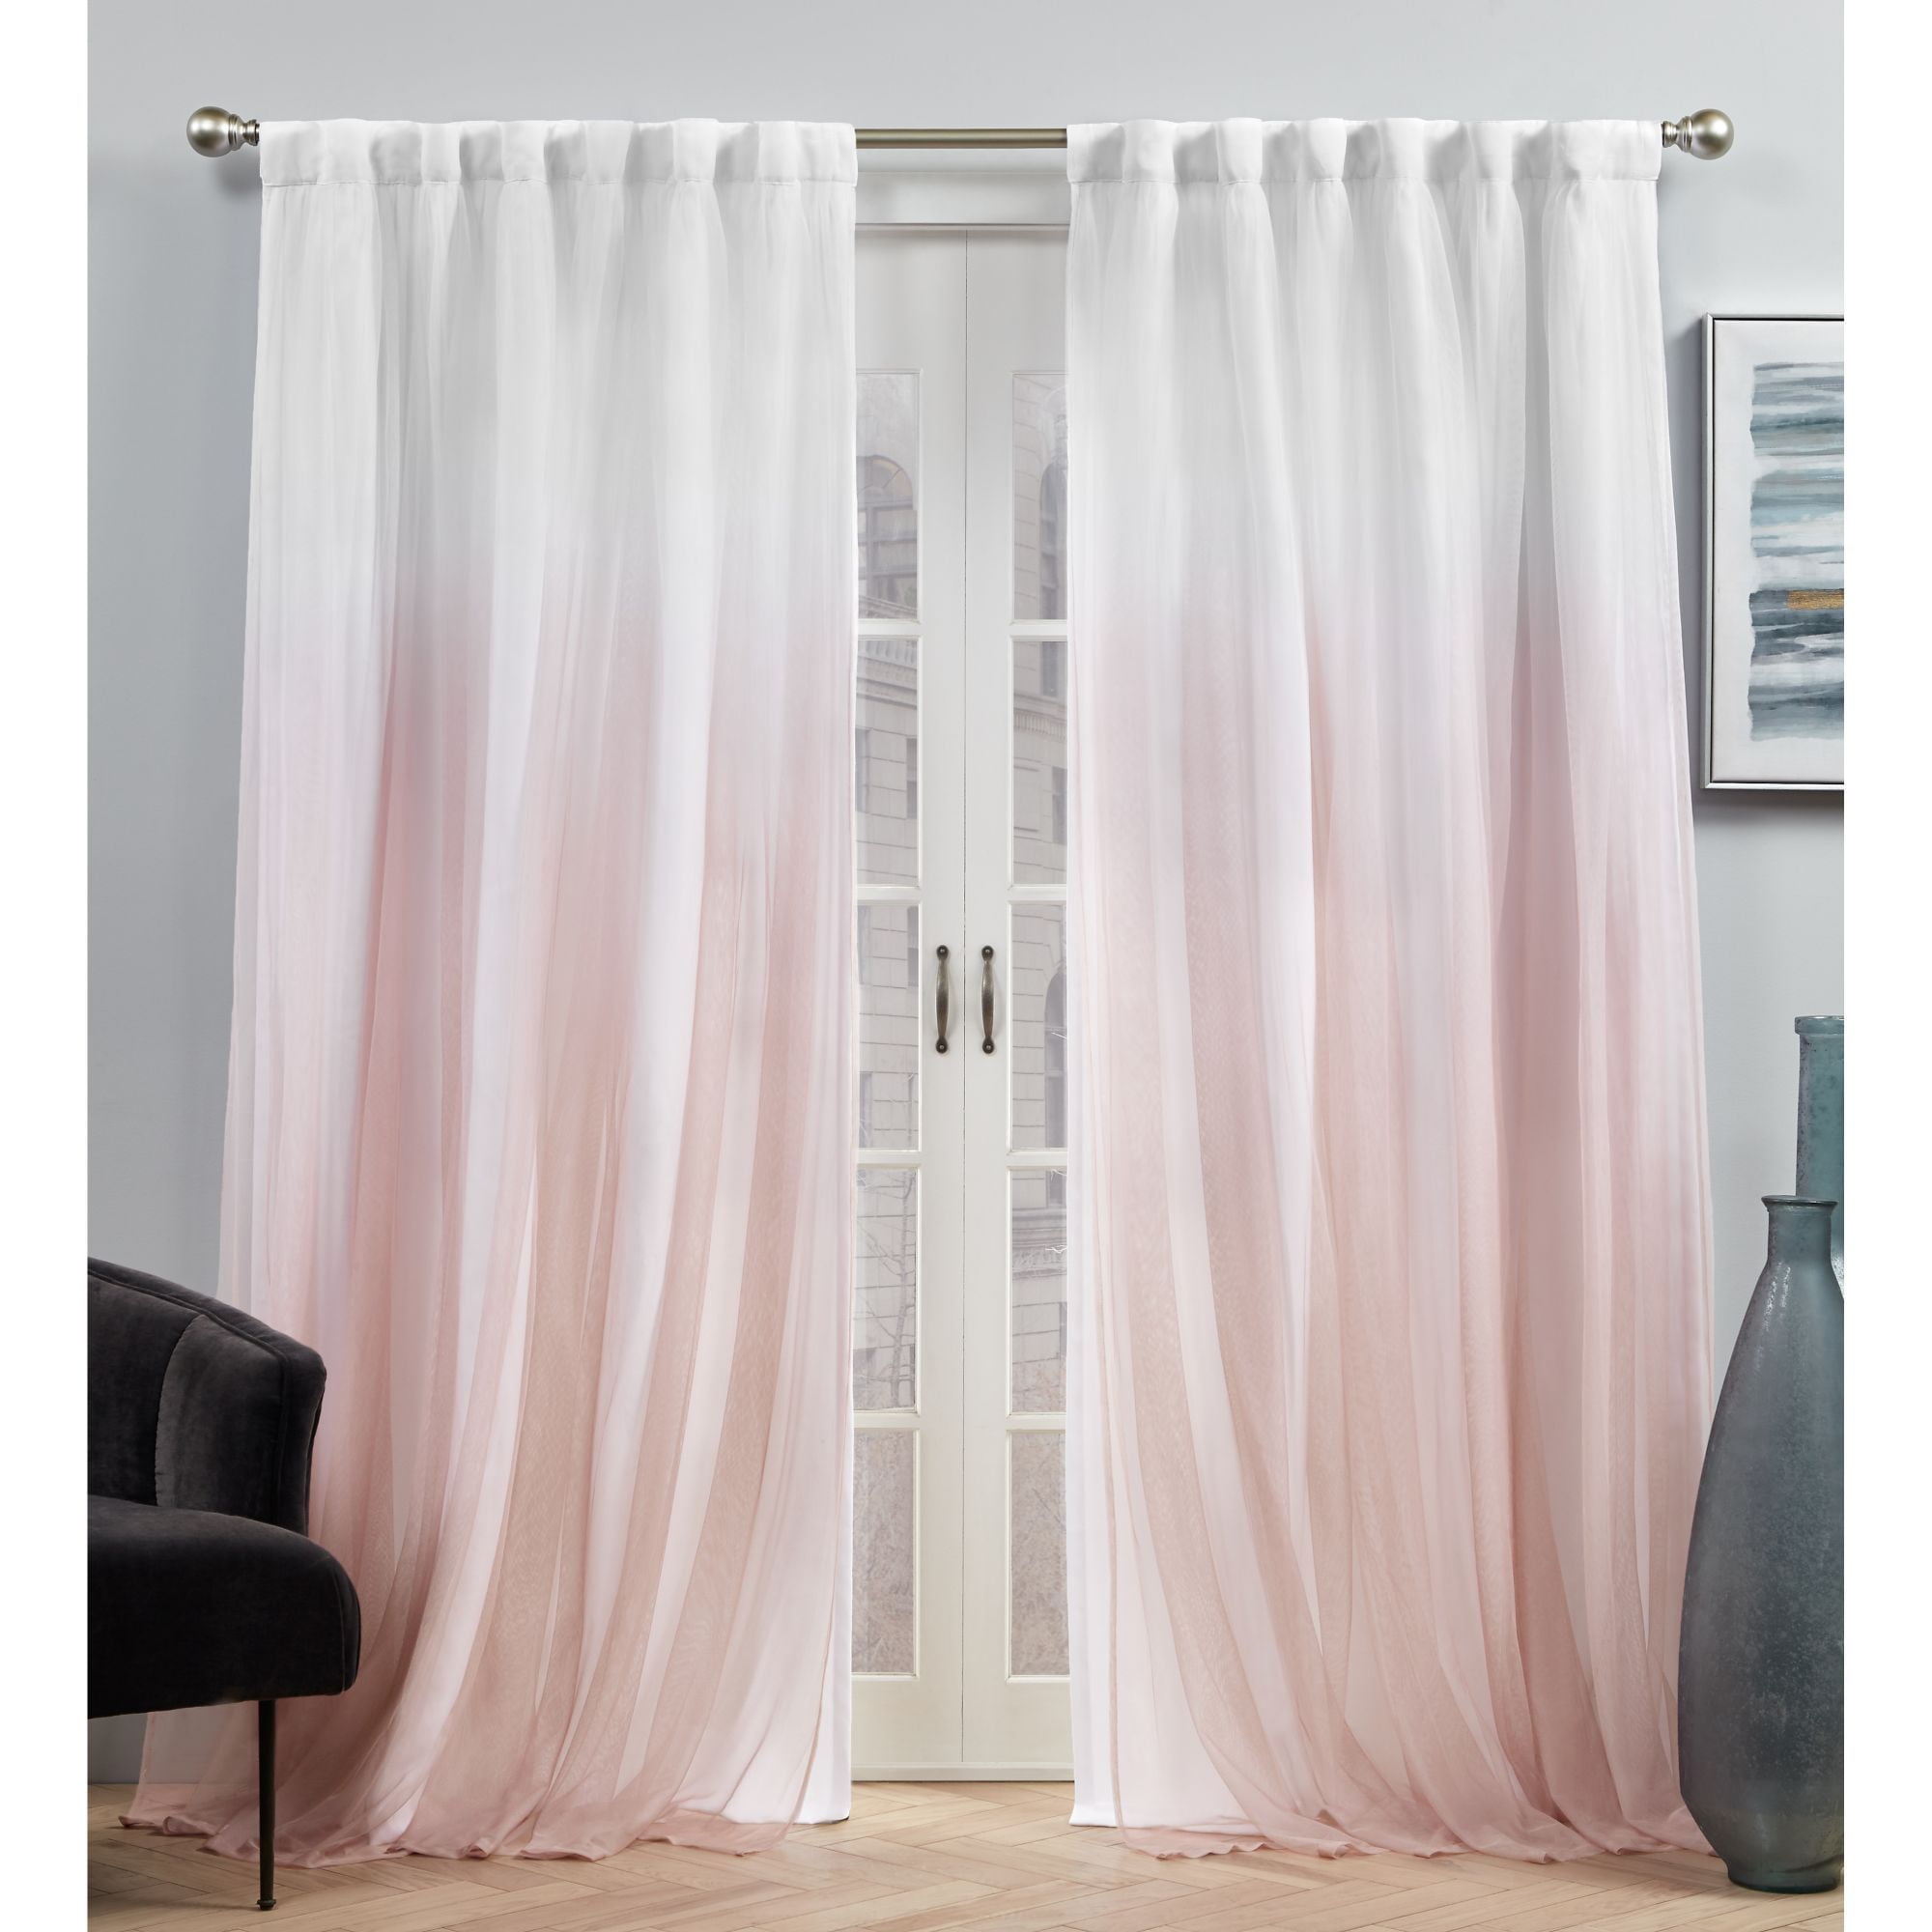 Details about   Set 2 Sheer Baby Blue Pink Ombre Curtains Panels Drapes Pair 63 72 84 96 inch L 